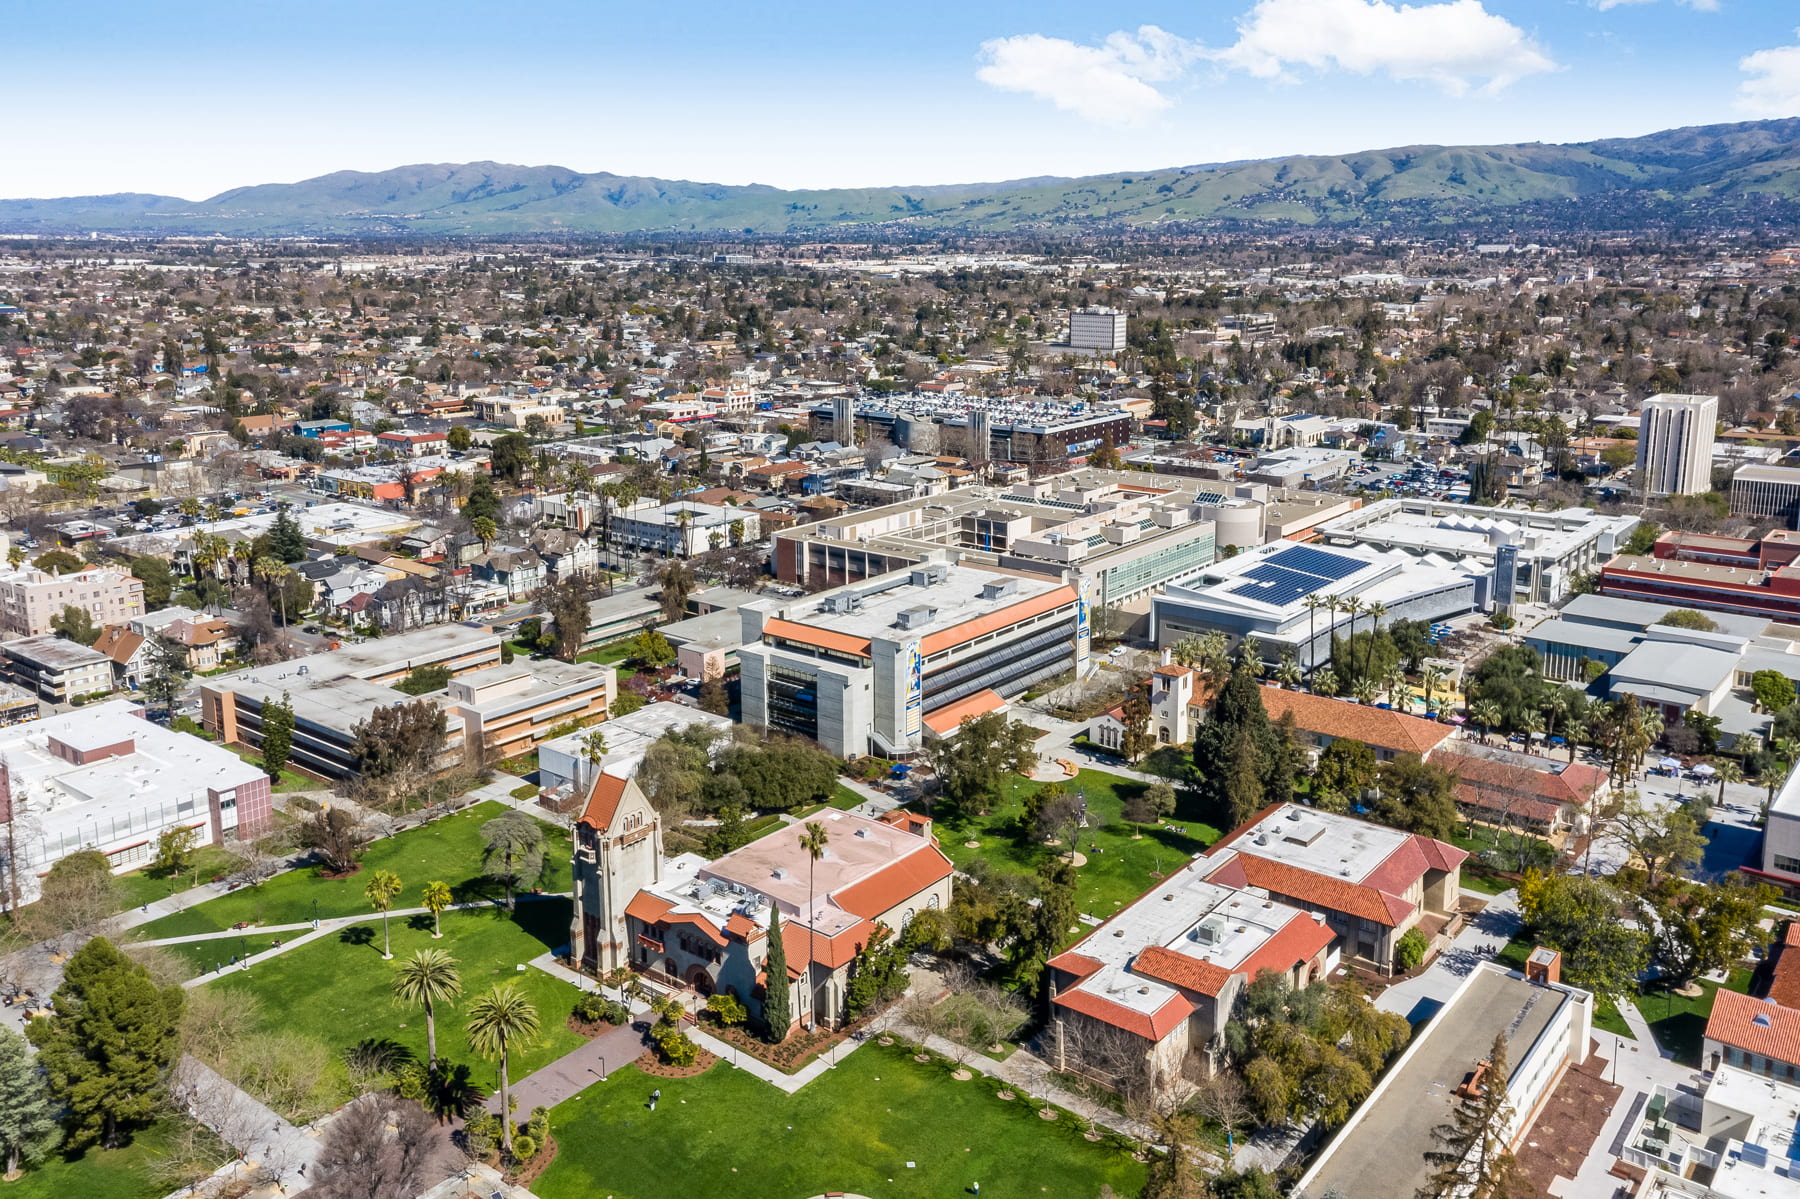 sjsu secured over $15.5 million from state budget and grants this summer | sjsu newscenter